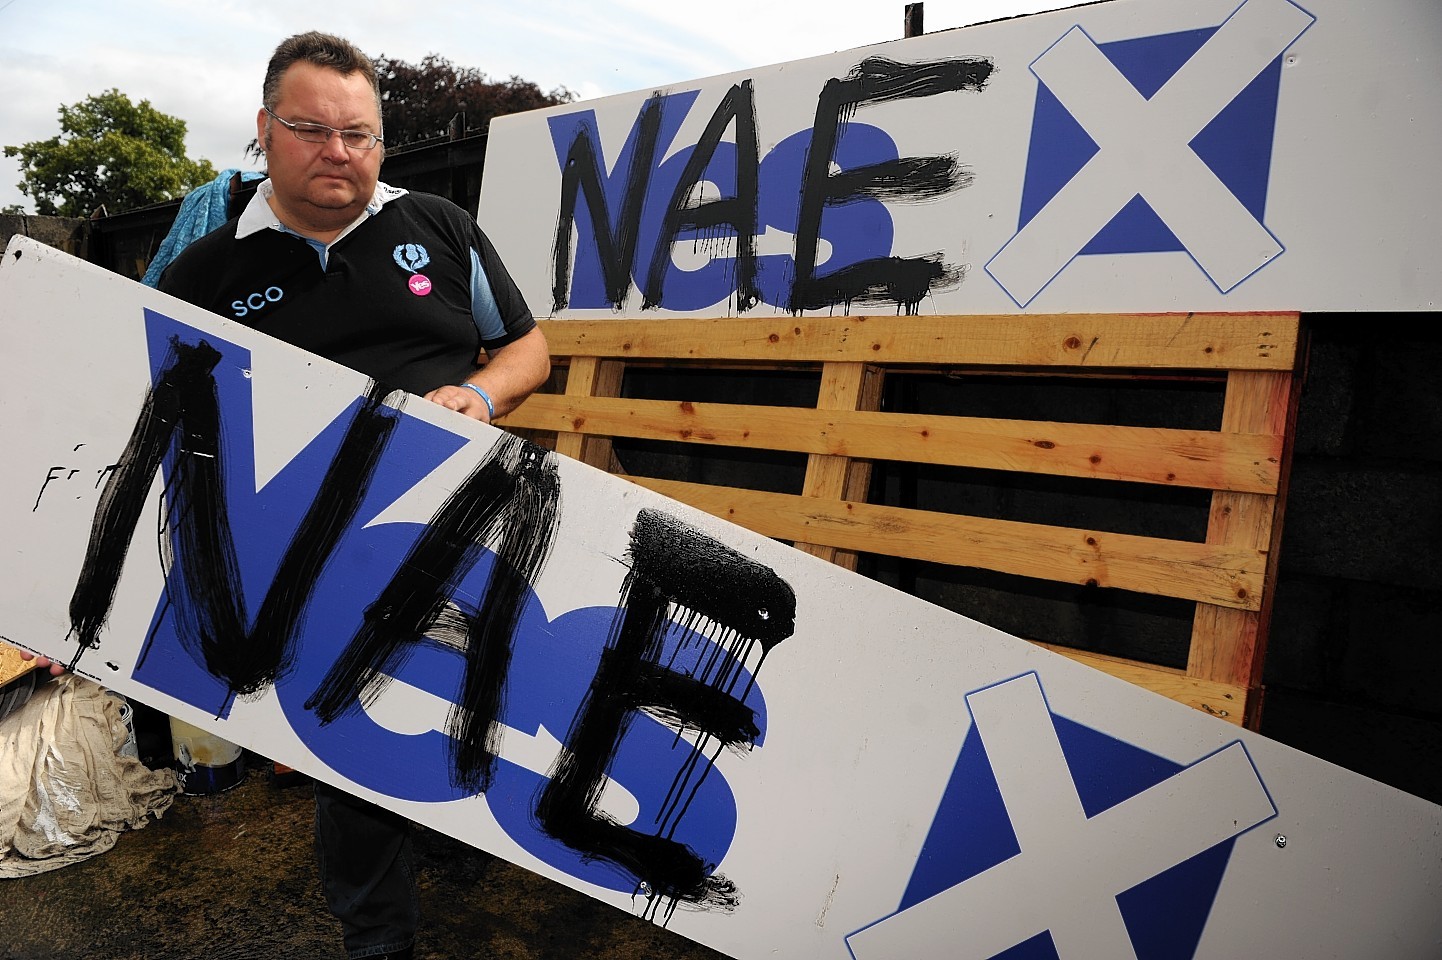 Graffiti on Yes campaign posters